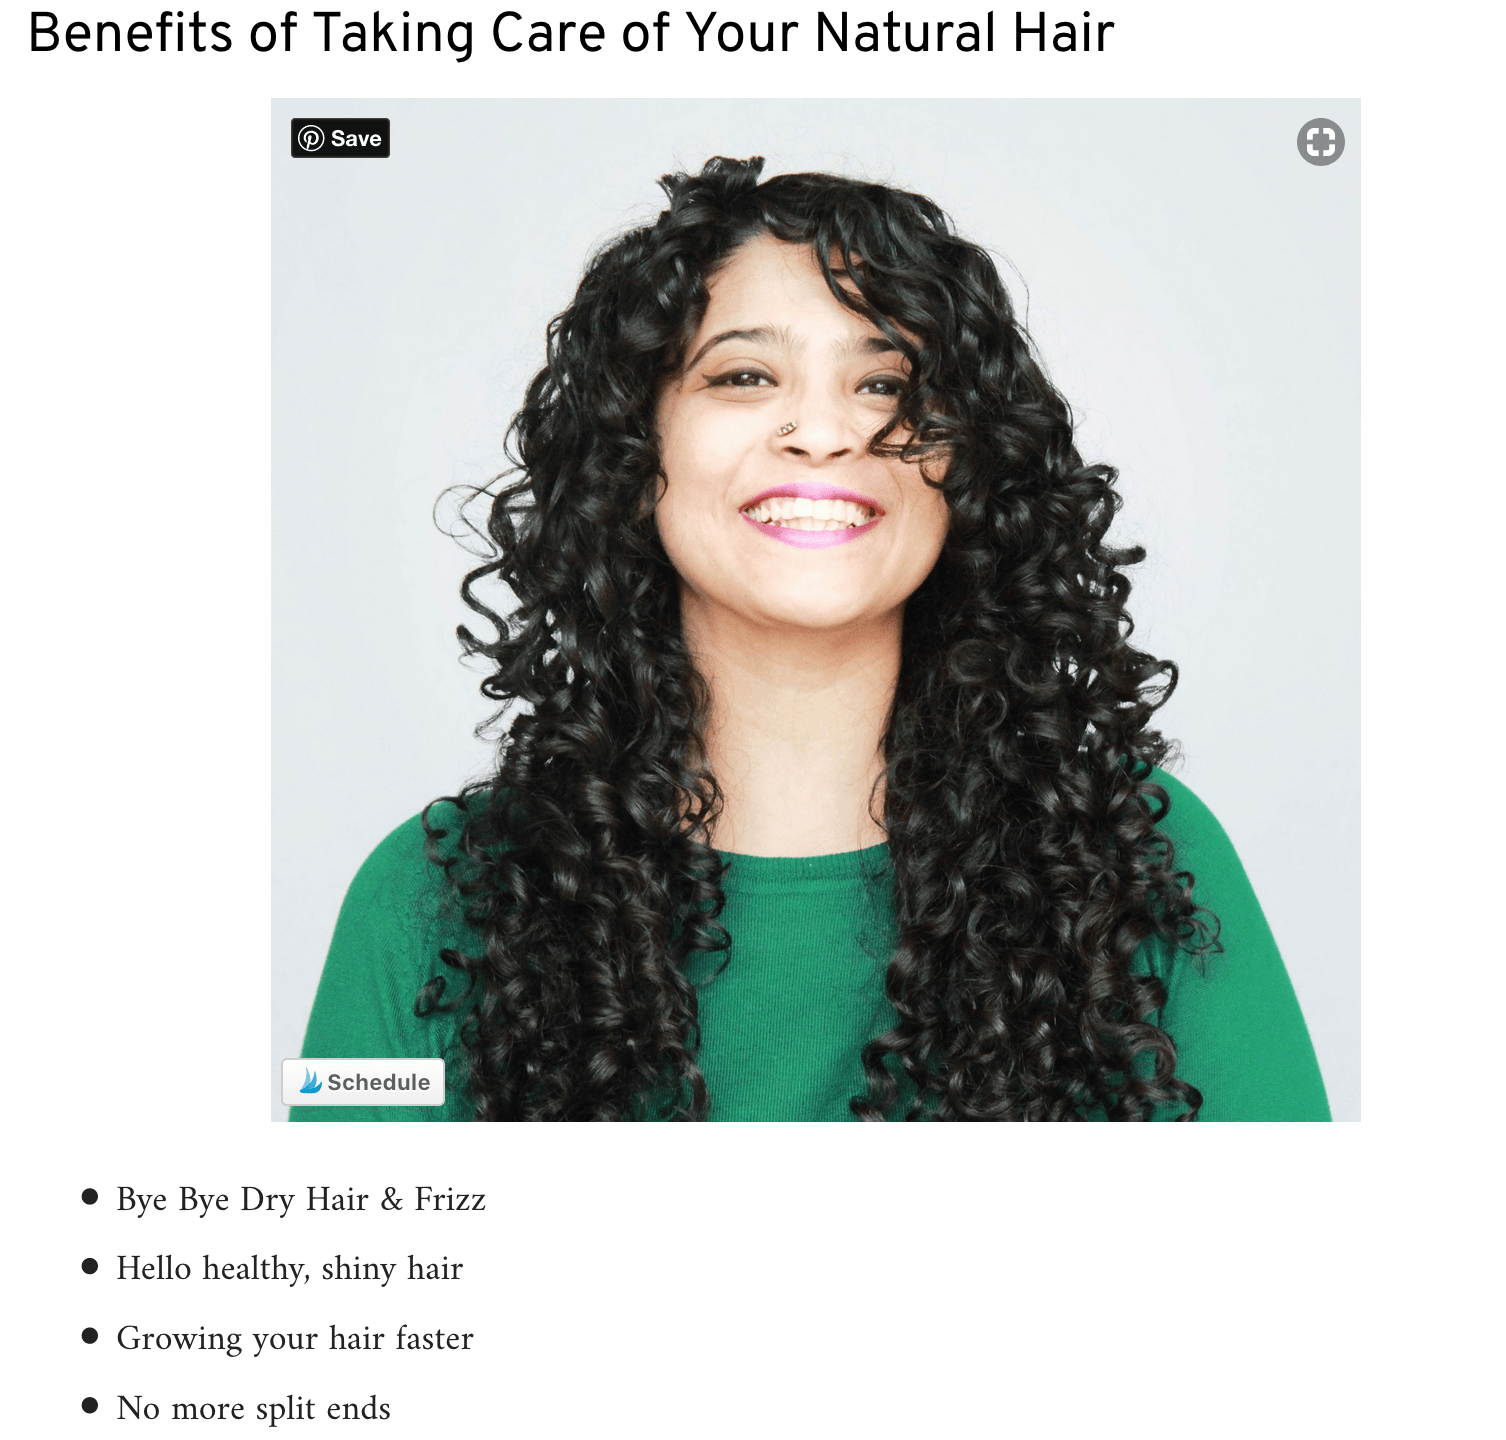 Pallavi writes beautiful content for her curly hair blog. Anyone reading her posts will know that she is an expert in Curly Hair Topics. So, it's very easy for her to endorse curly hair products and people won't hesitate to buy them!